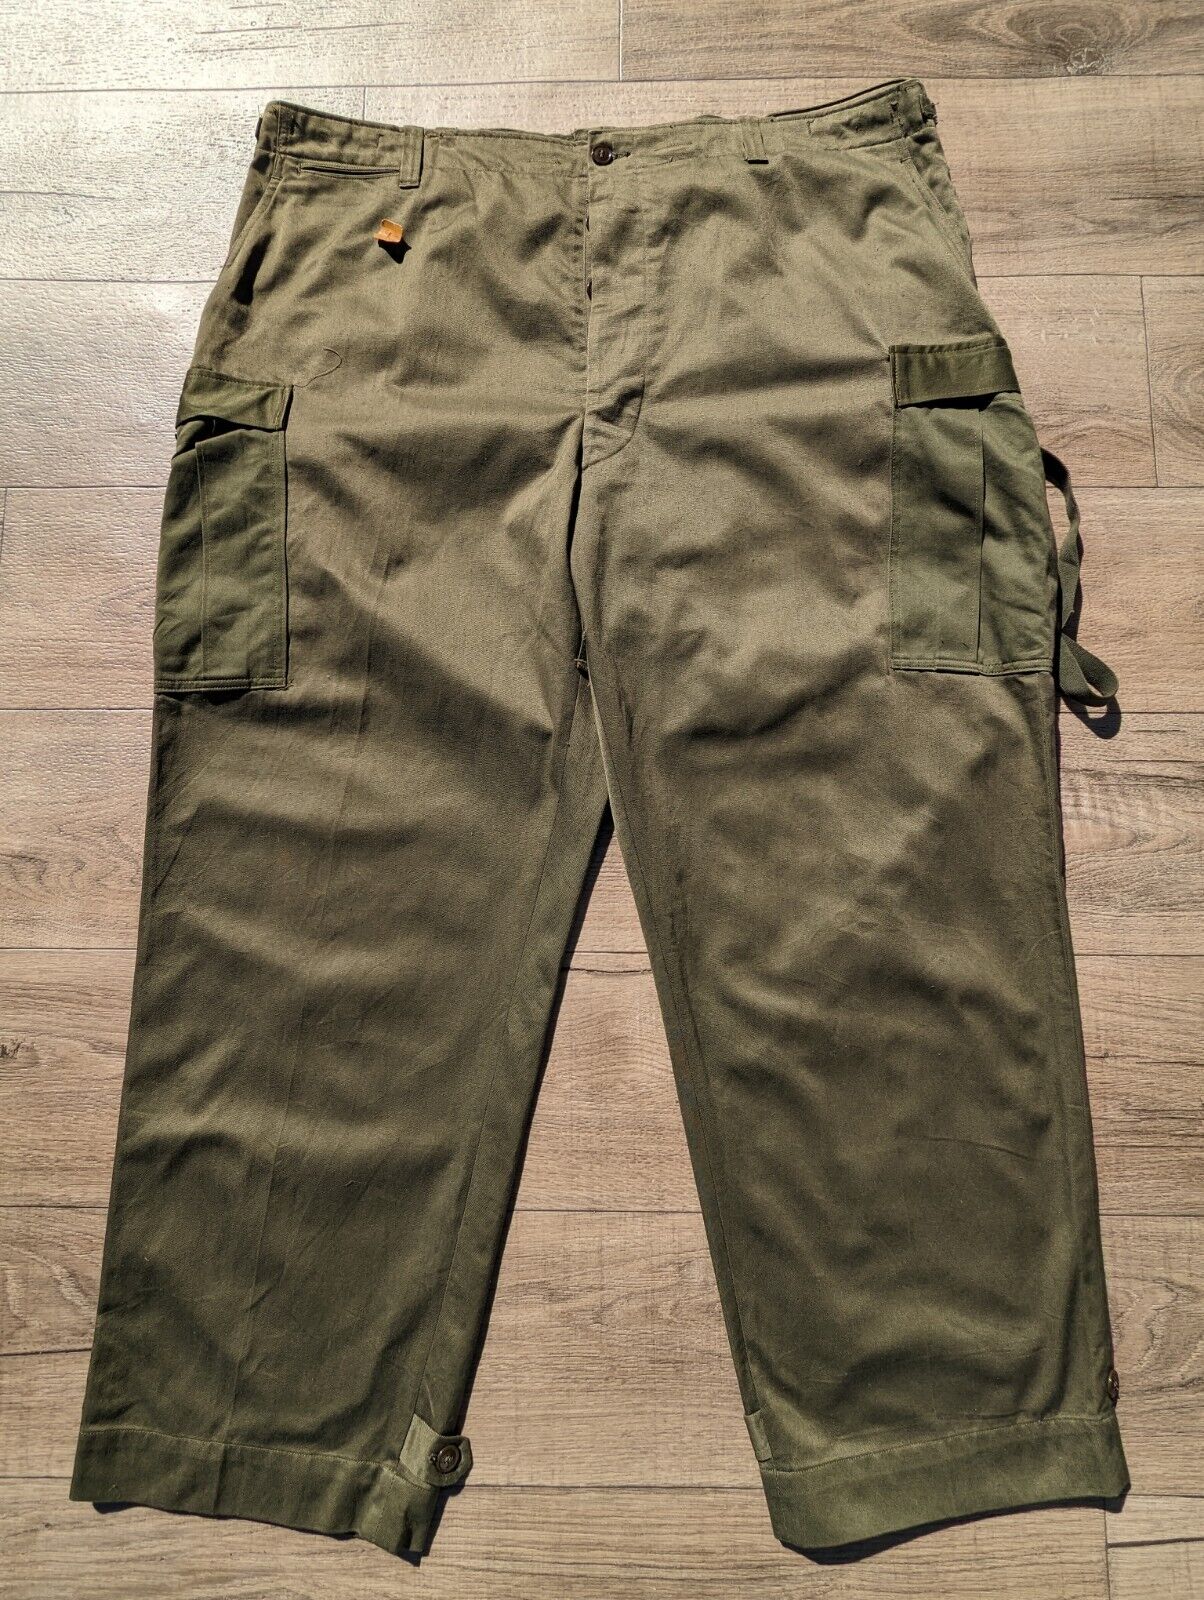 NOS VTG Korea Early M-1951 Field Trousers Shell Cargo Military Pants 50x32